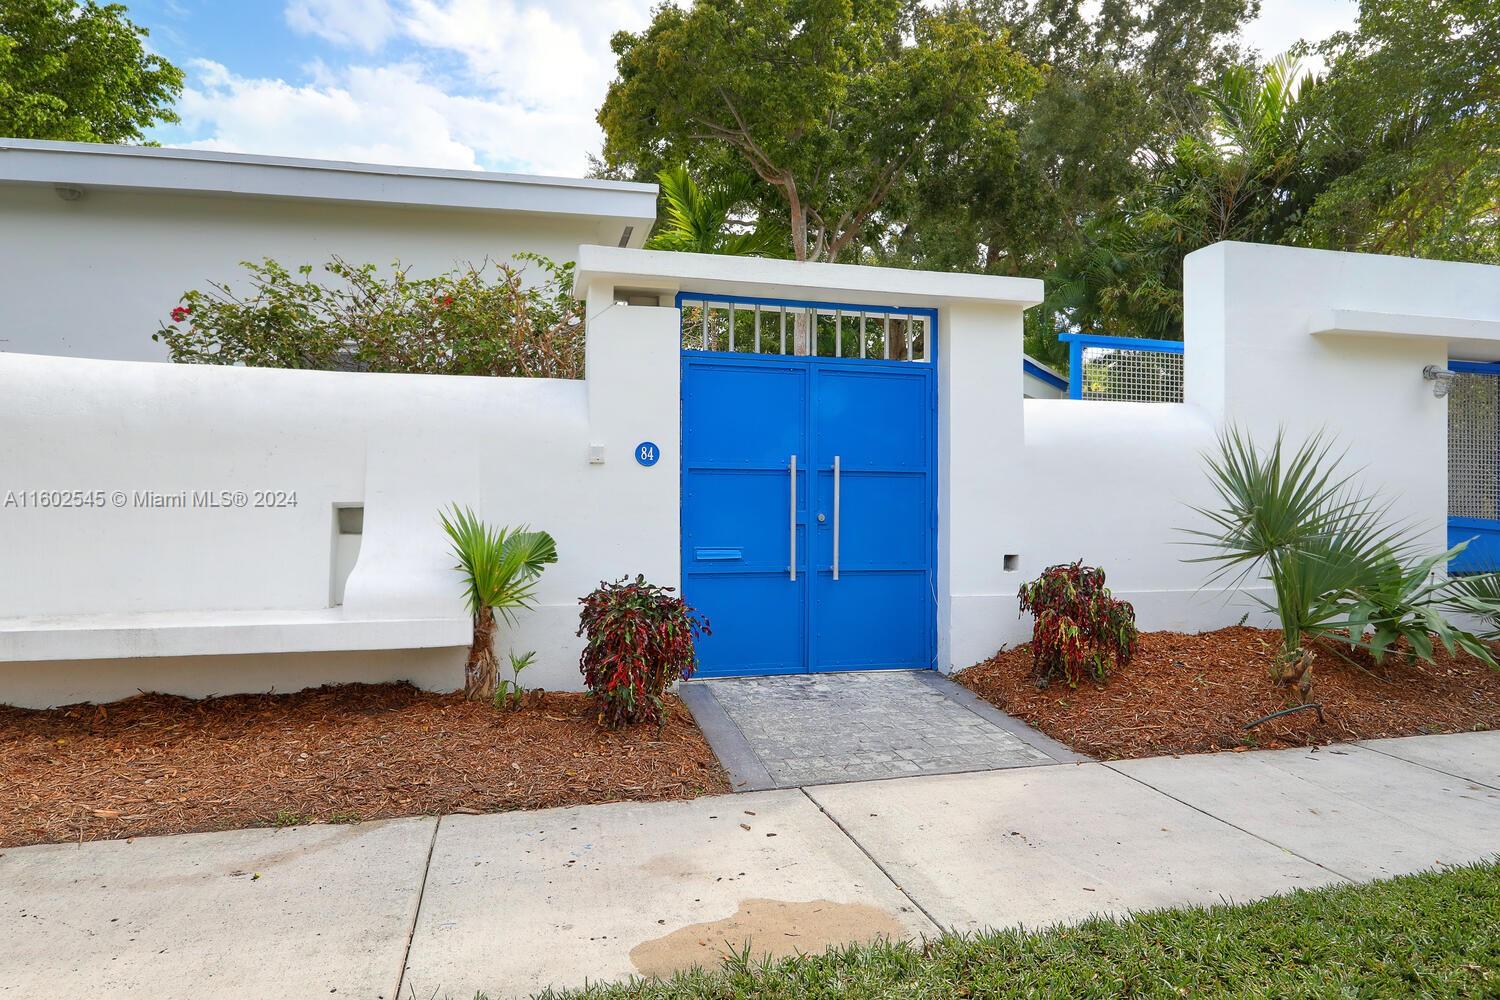 Ultra-private, walled & gated Miami-Modern style home in the exclusive Bay Heights neighborhood of Coconut Grove. 24/7 police patrol. Light-filled living spaces with vaulted & beamed ceilings, hardwood flooring & banks of French doors opening to the garden. Ideal floorplan features open layout, 4BR/3BA and custom kitchen w/wood cabinetry, stone countertops & stainless appliances. Large primary suite offers walk-in closet & luxurious marble bath w/ soaking tub & separate shower. Updates include new: roof (2022), HVAC, water heaters, exterior painting, artificial turf, plantation shutters & custom window shades throughout. Free-standing, 600 SF 2 CG w/potential to become additional living space. Enjoy outdoor living and entertaining on the expansive terrace surrounding tropical pool &​​‌​​​​‌​​‌‌​‌‌‌​​‌‌​‌‌‌​​‌‌​‌‌‌ spa.